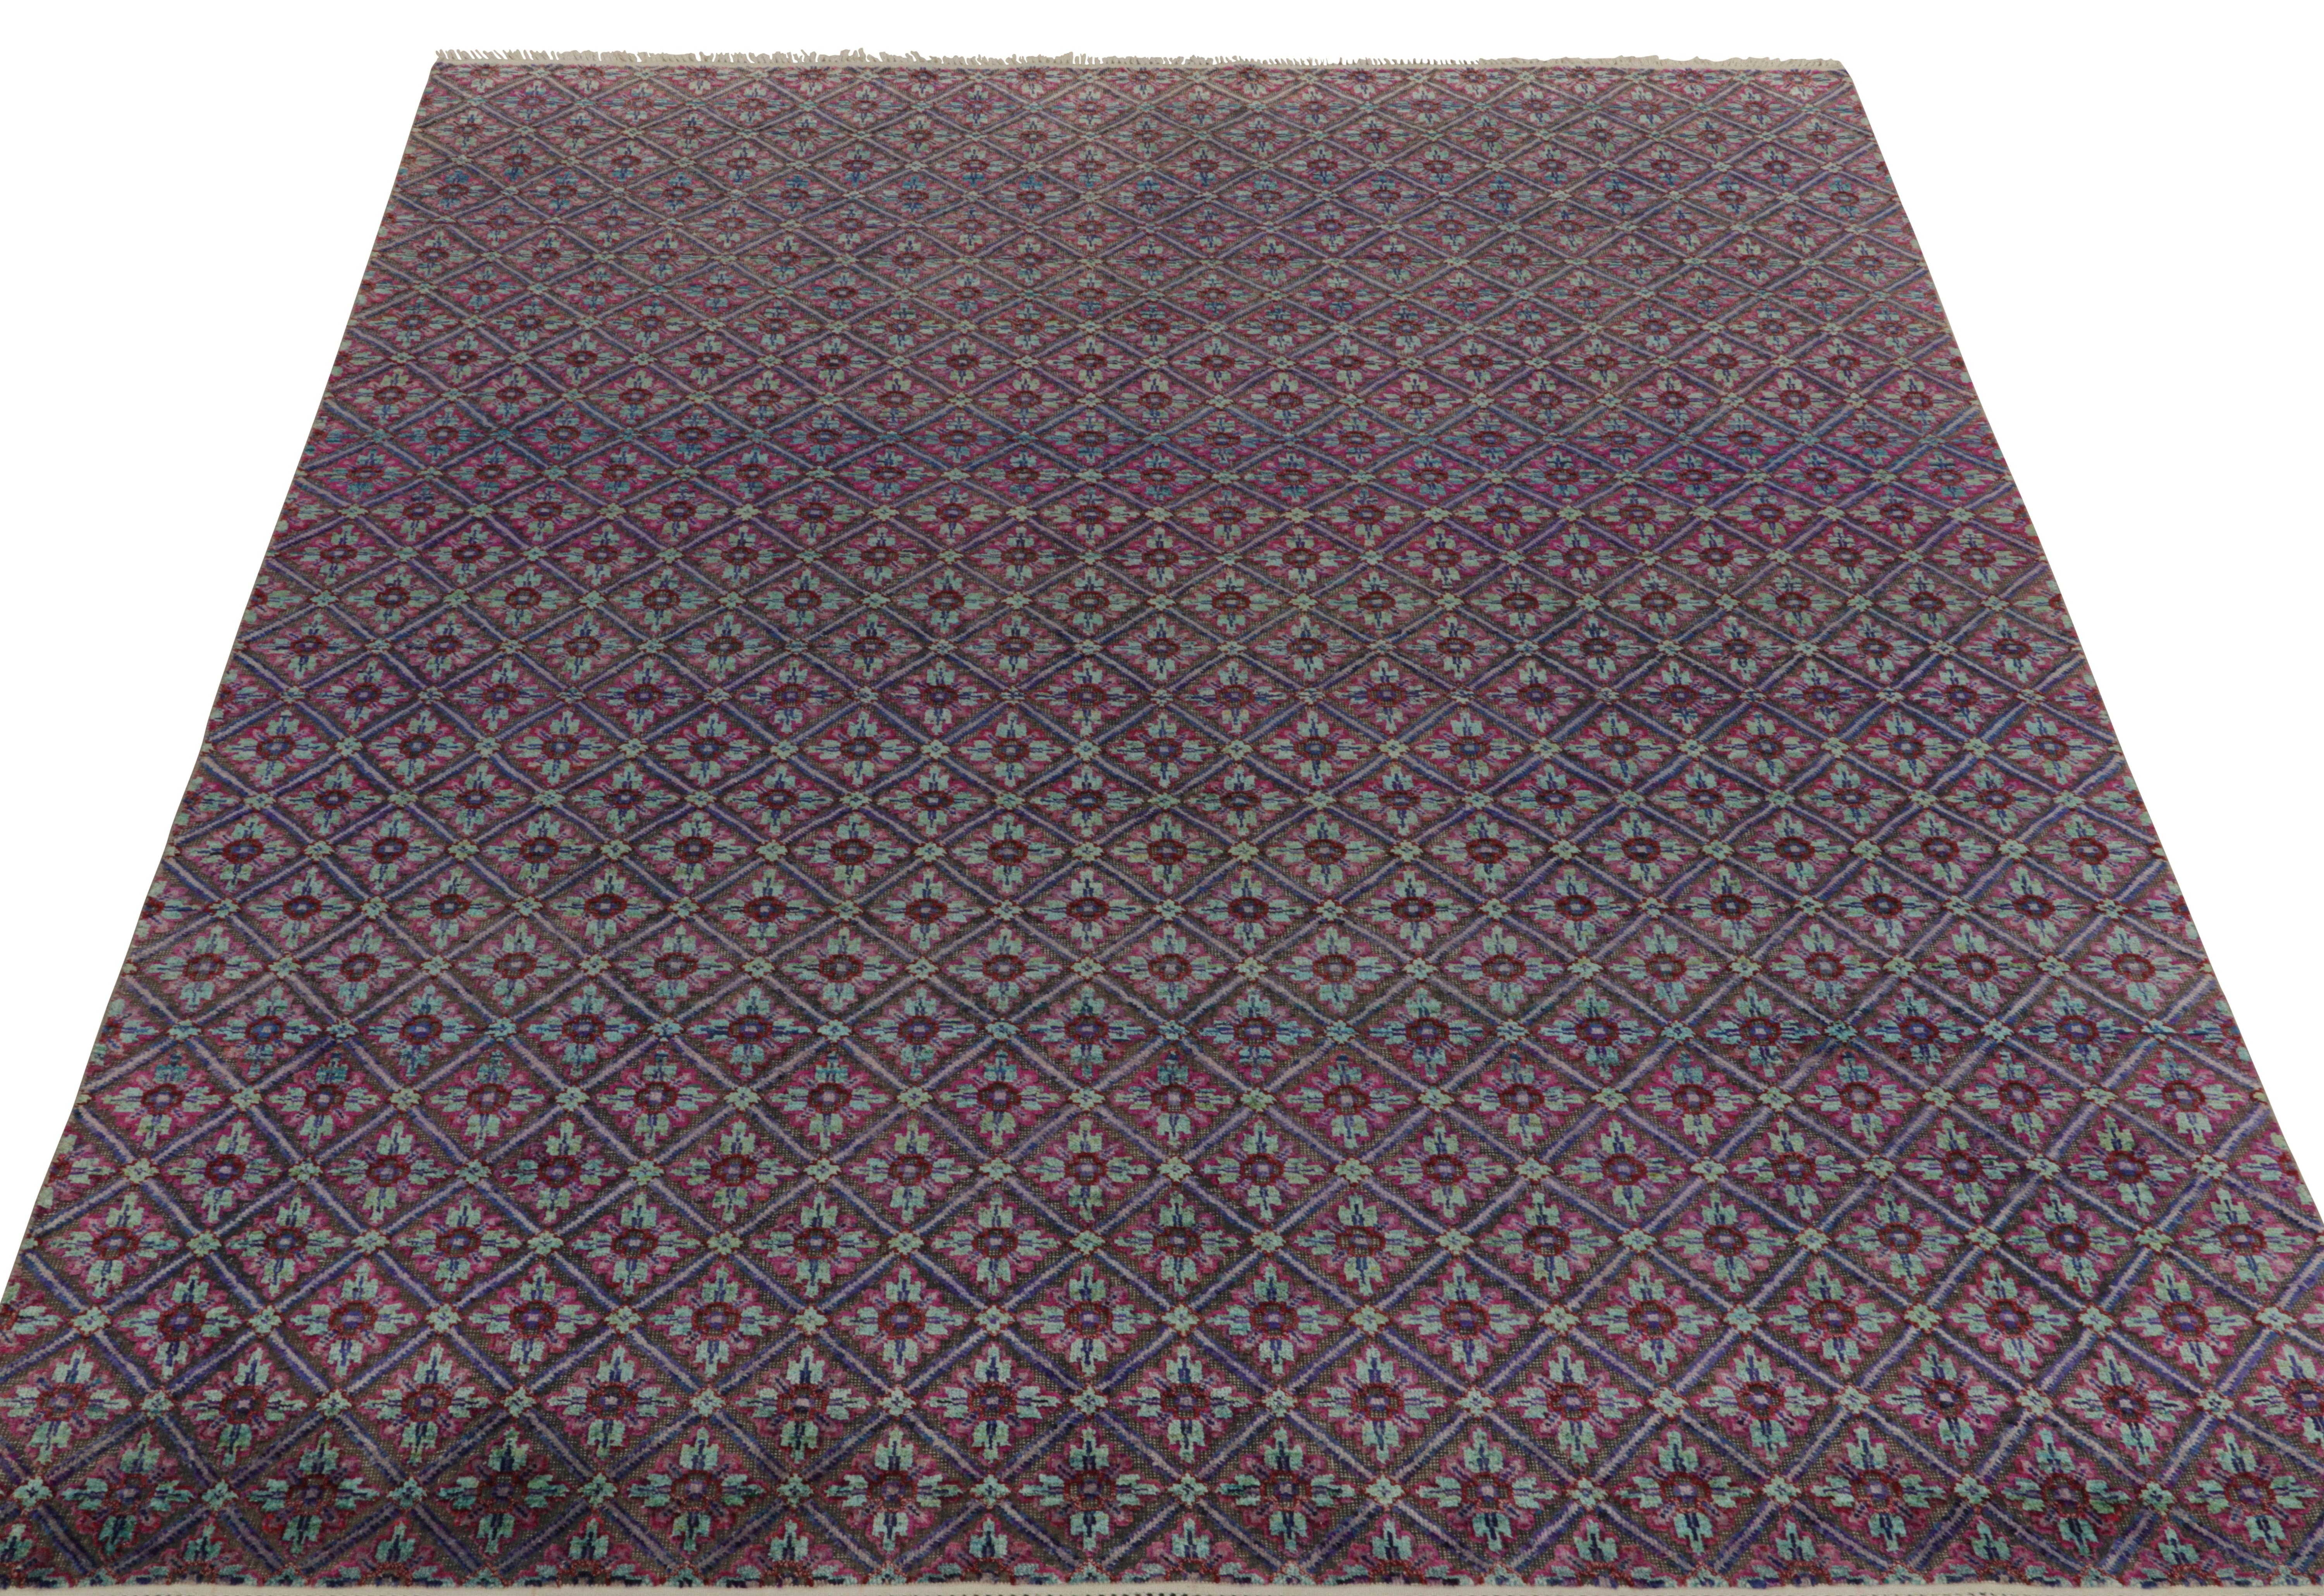 Tabriz Rug & Kilim’s Contemporary Rug in Blue, Pink and Red Lattice Pattern For Sale